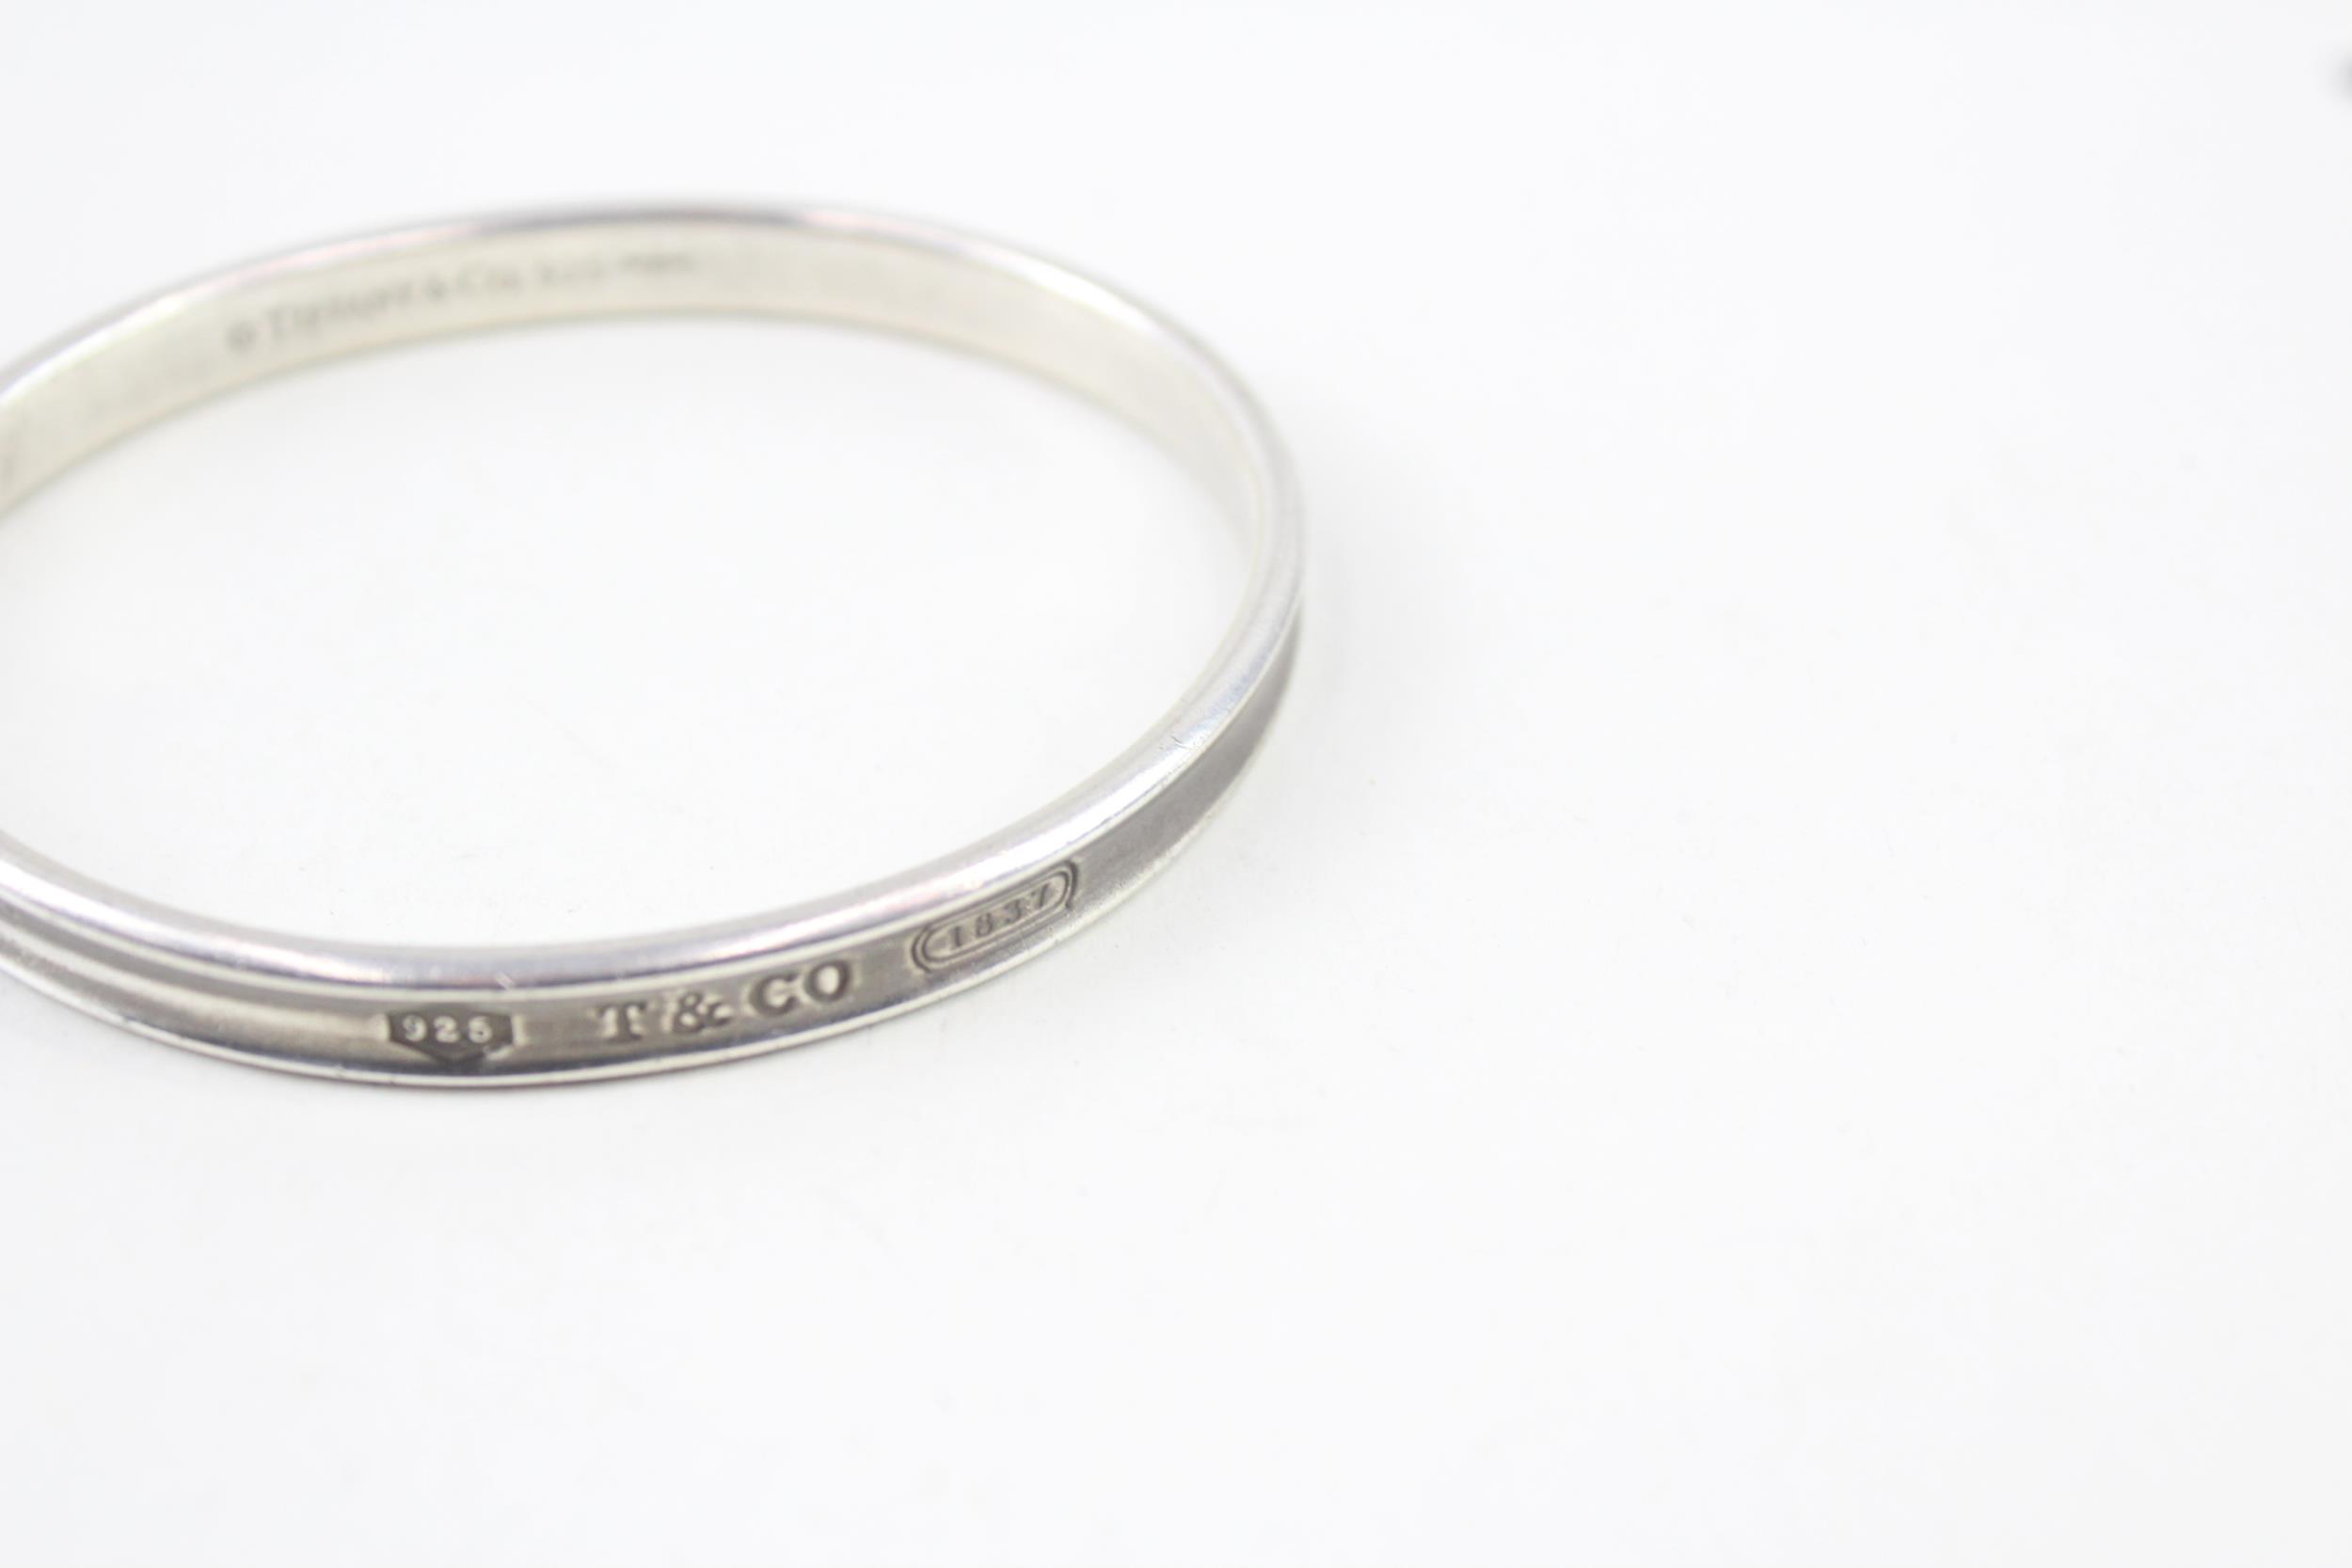 Silver bangle by designer Tiffany & Co (32g) - Image 10 of 12